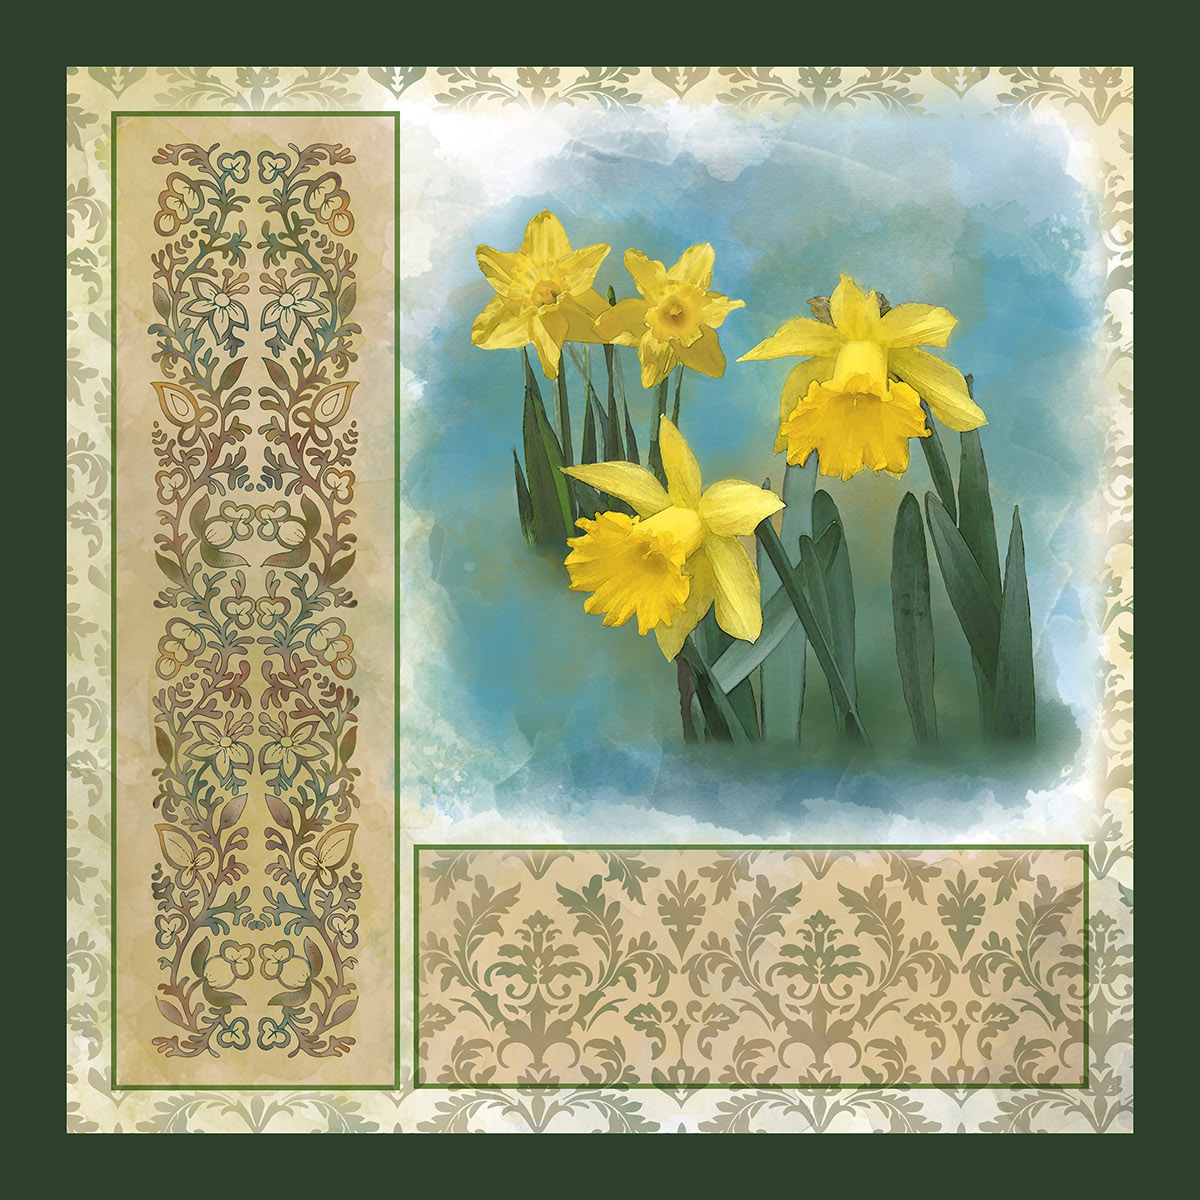 Flowers vintage digital painting Patterns damask pattern print textile daffodils tulips poppies